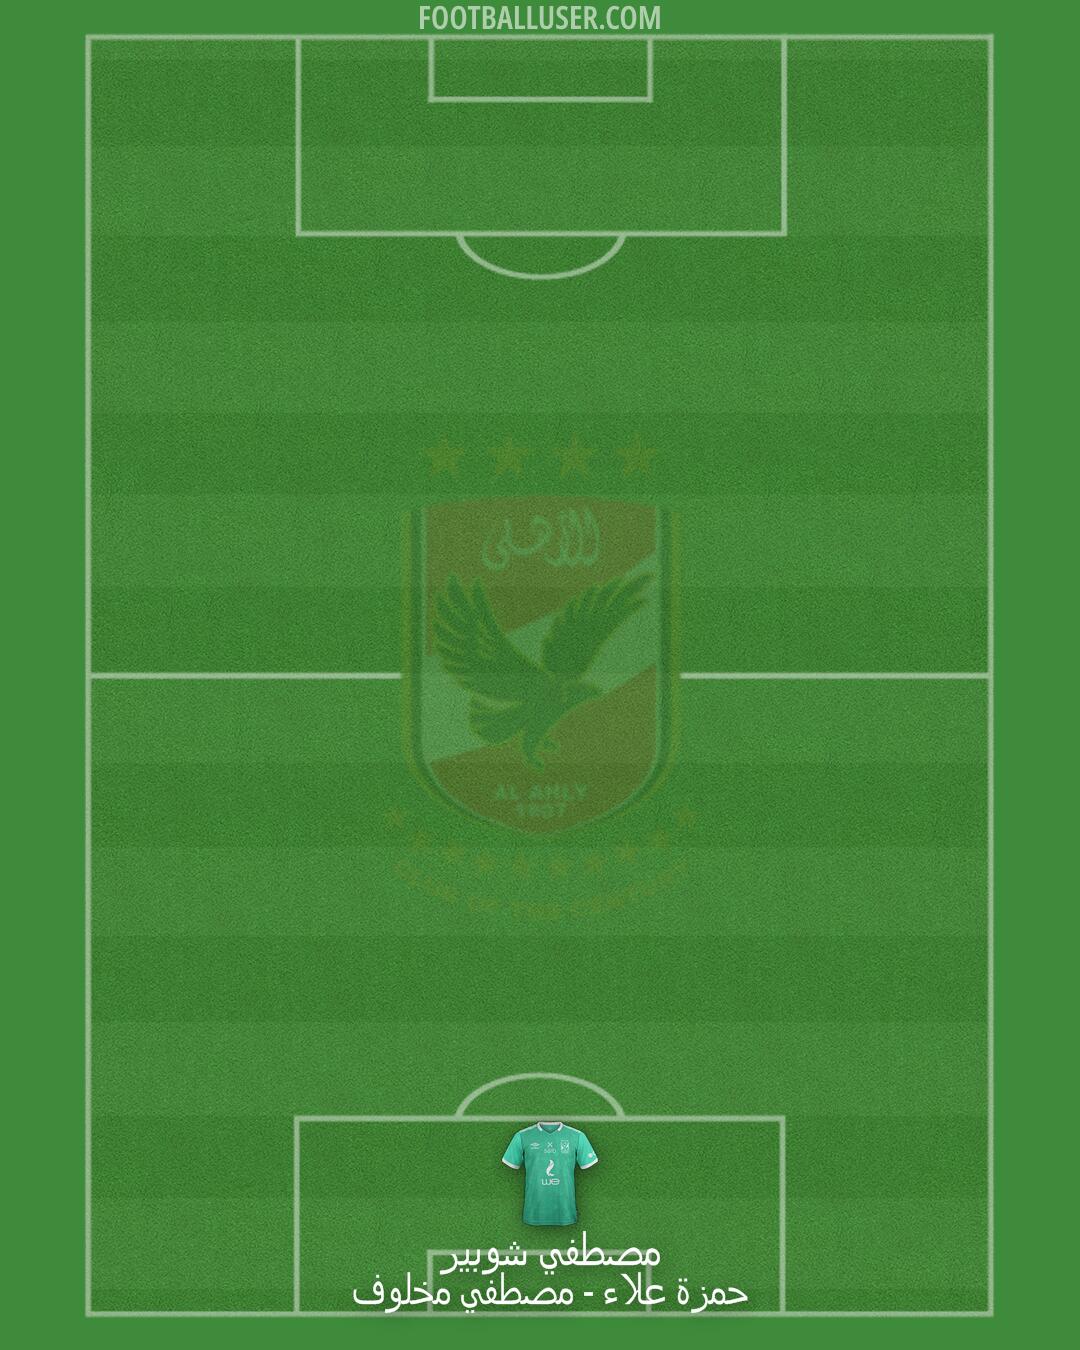 Al-Ahly Formation 2024